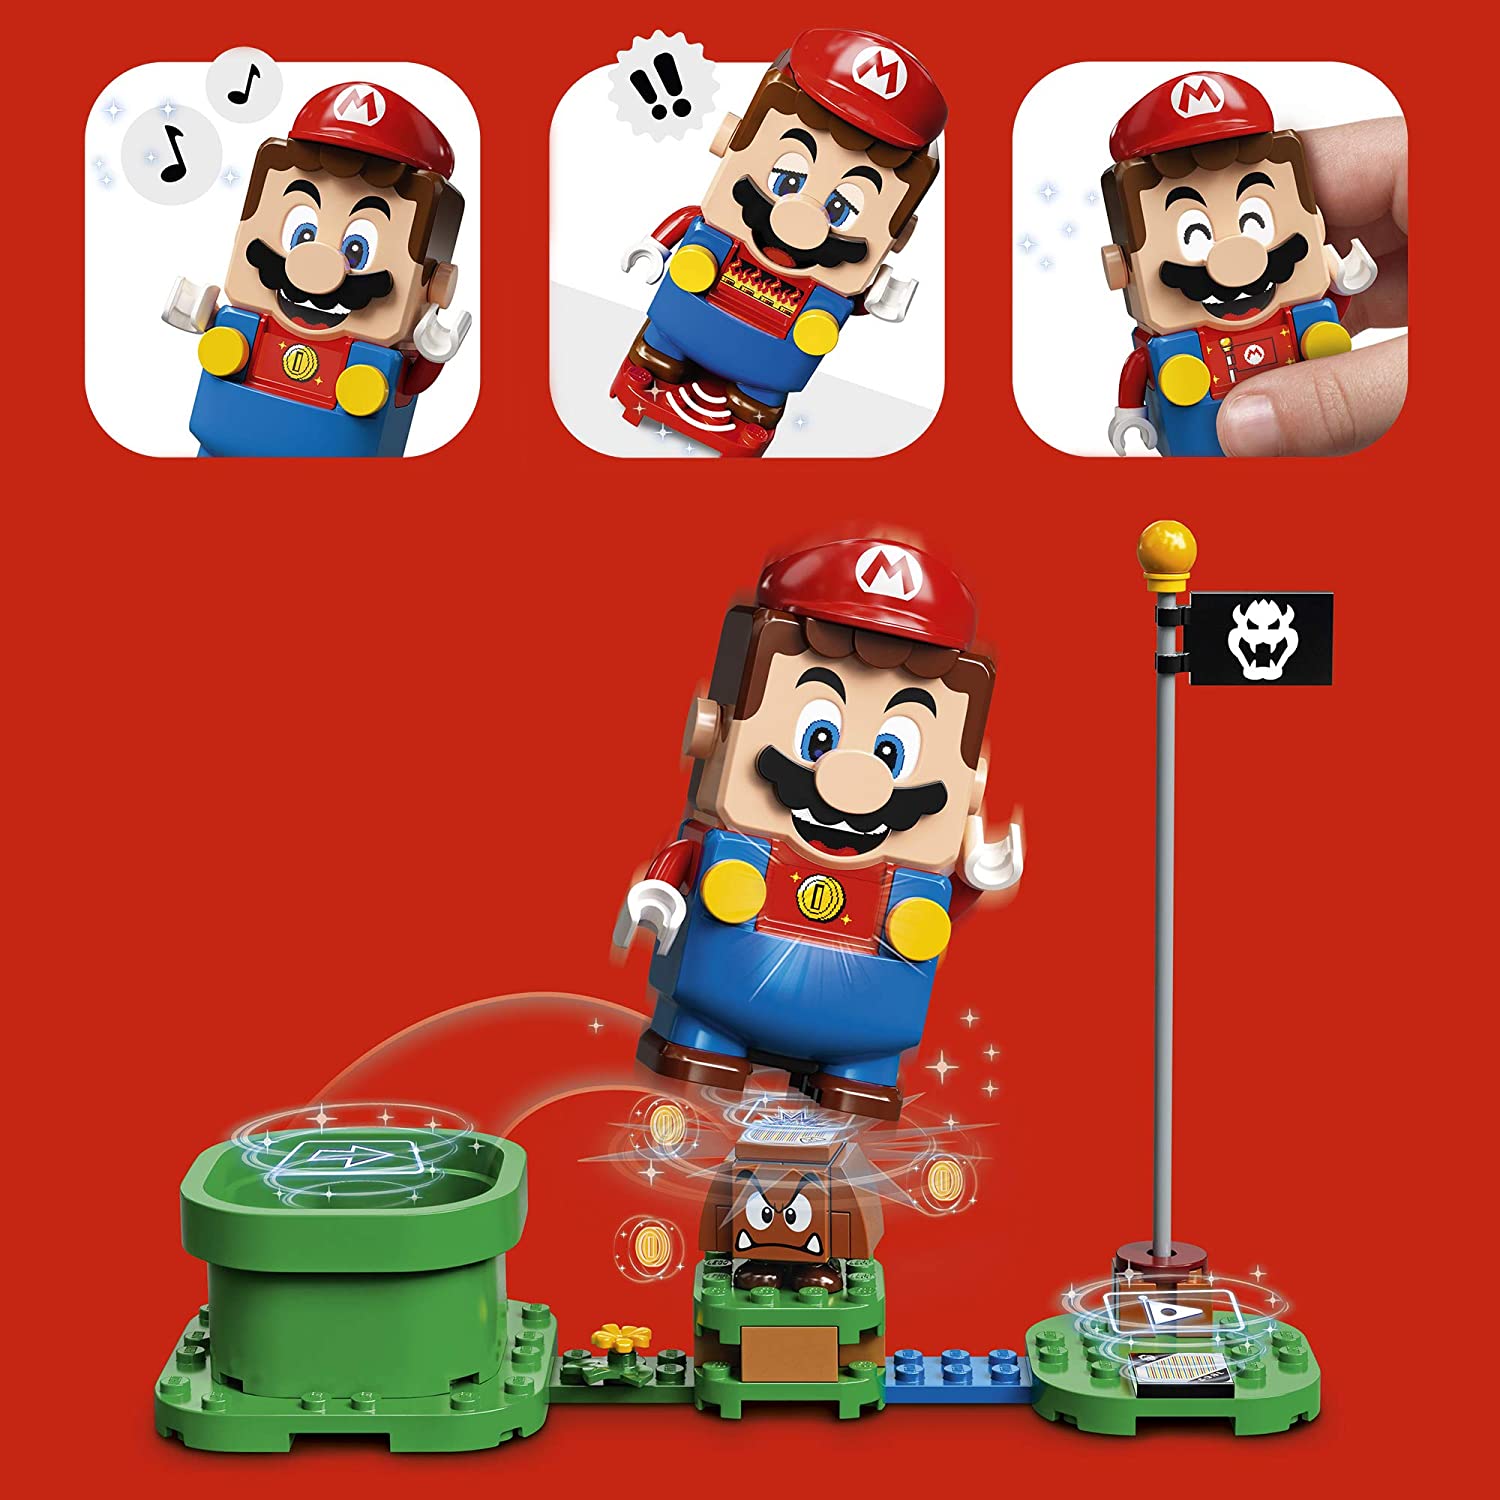 Which LEGO Super Mario Set Should You Buy First?